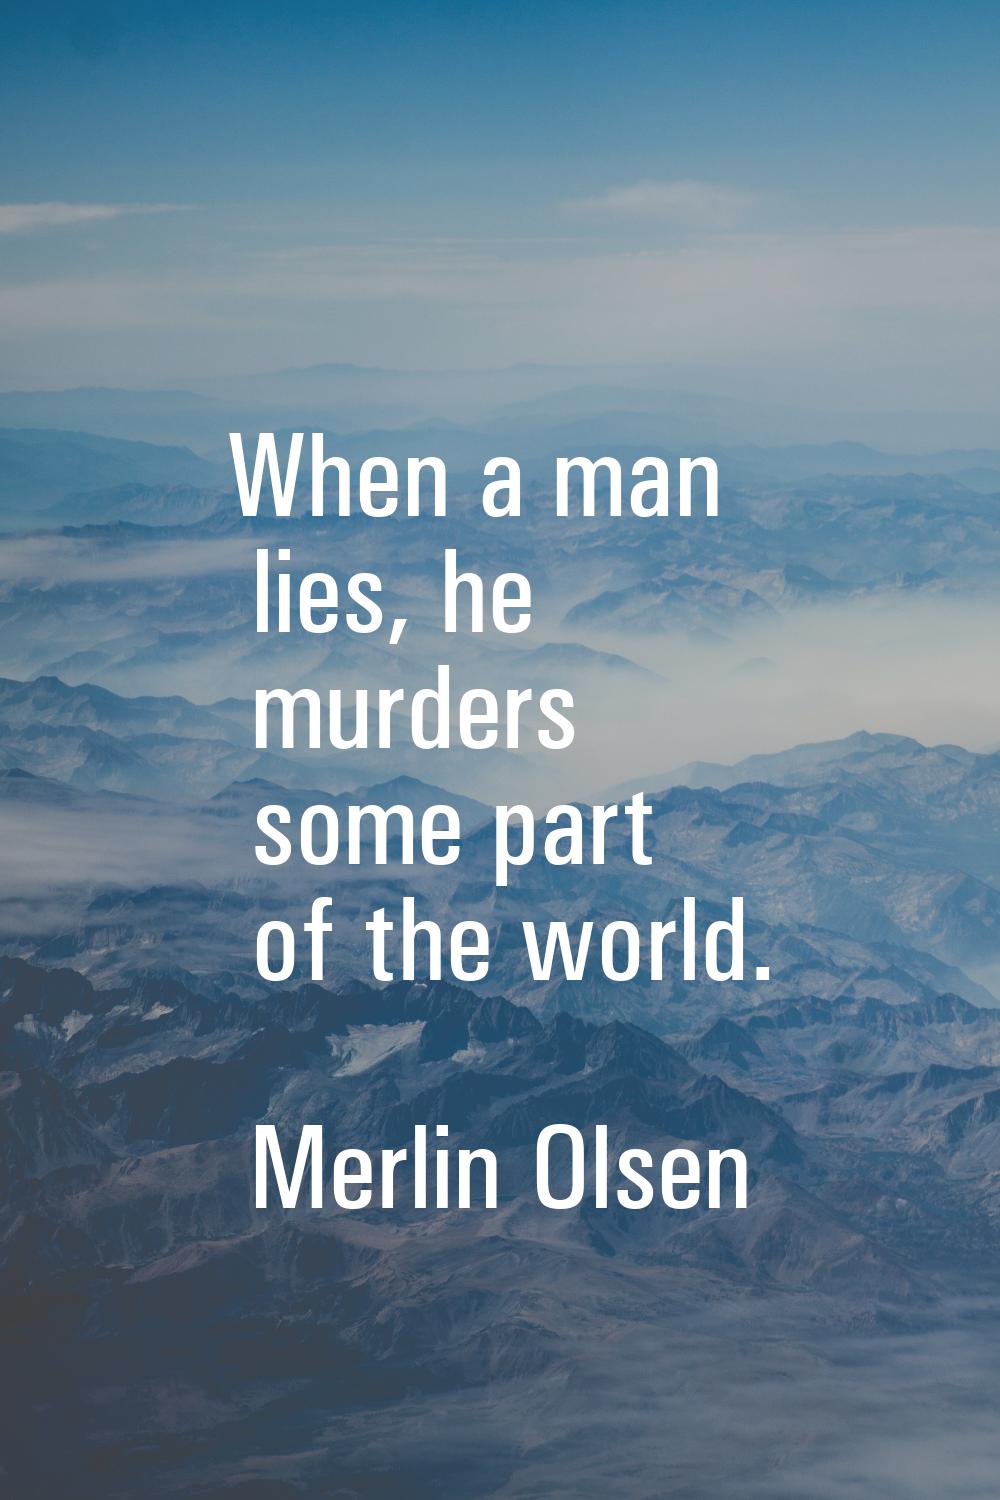 When a man lies, he murders some part of the world.